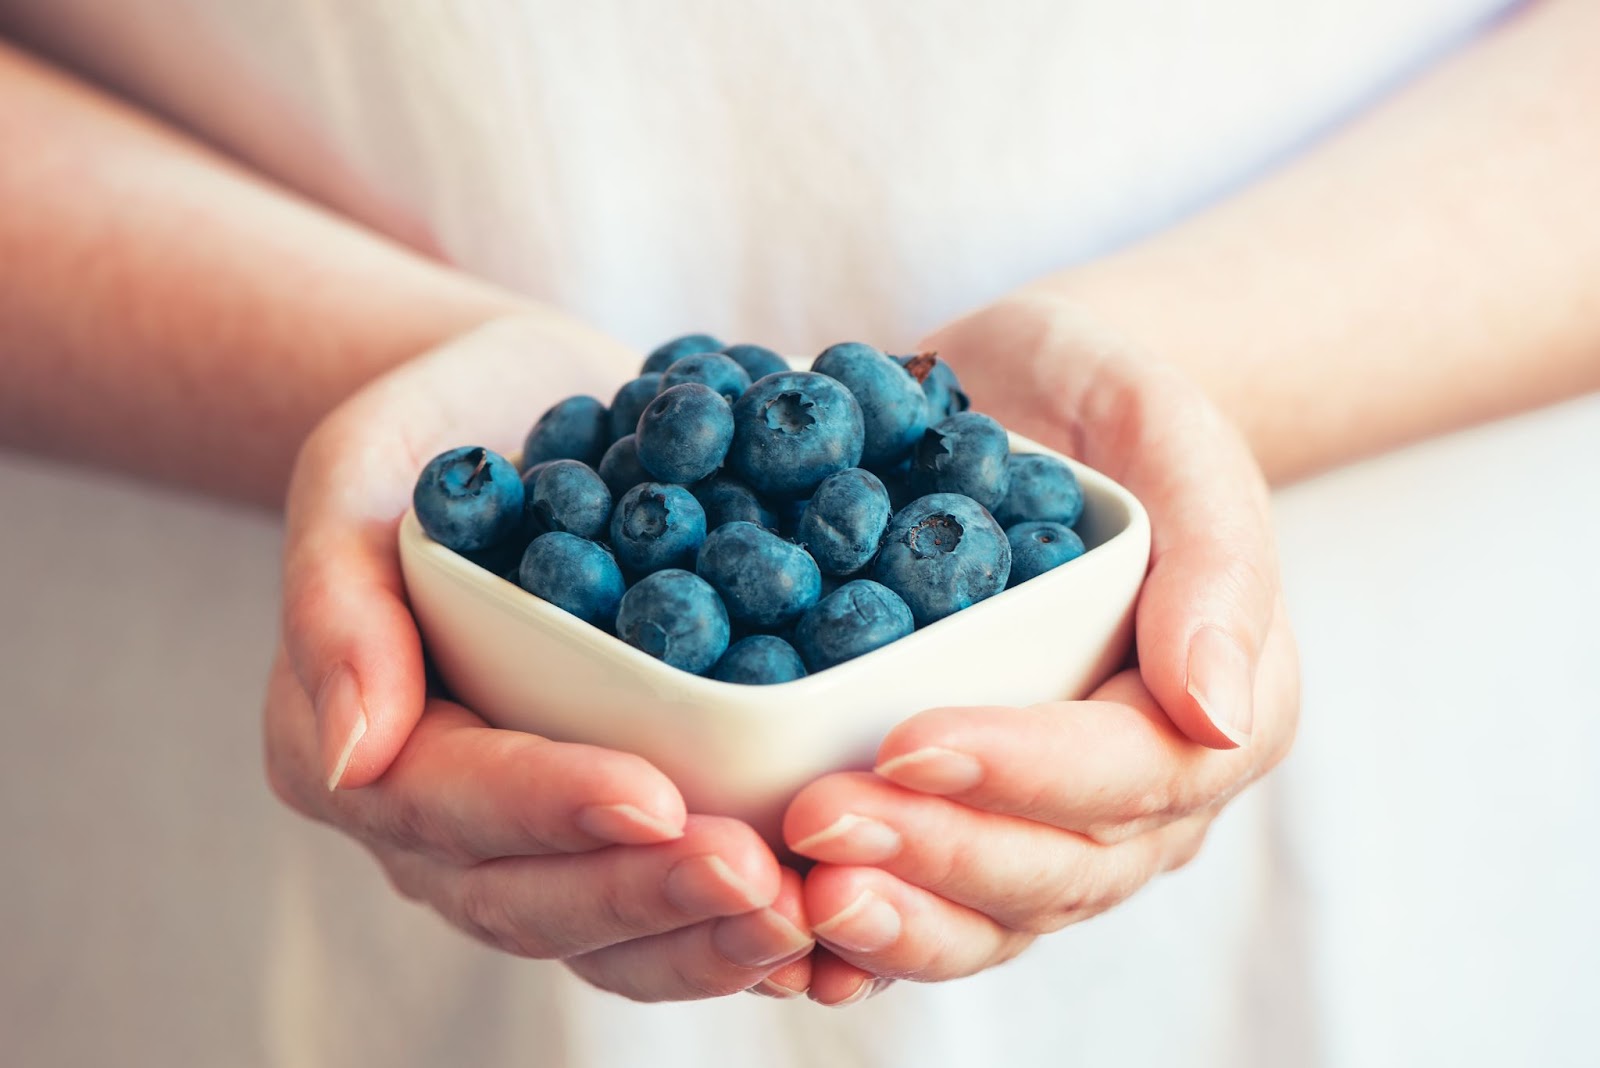 <p>Blueberries, often referred to as nature's wrinkle cream, are rich in antioxidants, particularly anthocyanins, which combat free radicals that accelerate aging and damage cells. Regular consumption of these tiny blue orbs can improve skin radiance, memory, and potentially lower the risk of heart disease and cancer. Enjoy them in smoothies, yogurt, oatmeal, or by the handful for a sweet, anti-aging snack.</p> <p>To enhance the skin-boosting effects, combine blueberries with other nutrient-rich foods. Greek yogurt offers probiotics for gut health and clearer skin, while chia seeds provide hydrating omega-3 fatty acids. Nuts and seeds like almonds and sunflower seeds deliver vitamin E, a potent antioxidant that complements the anthocyanins in blueberries. Honey, a natural humectant, also helps retain moisture for softer, supple skin. Incorporating blueberries into your daily meals, whether in smoothies, cereals, puddings, or baked goods, is a delicious way to nourish your body and promote healthy, glowing skin.</p>